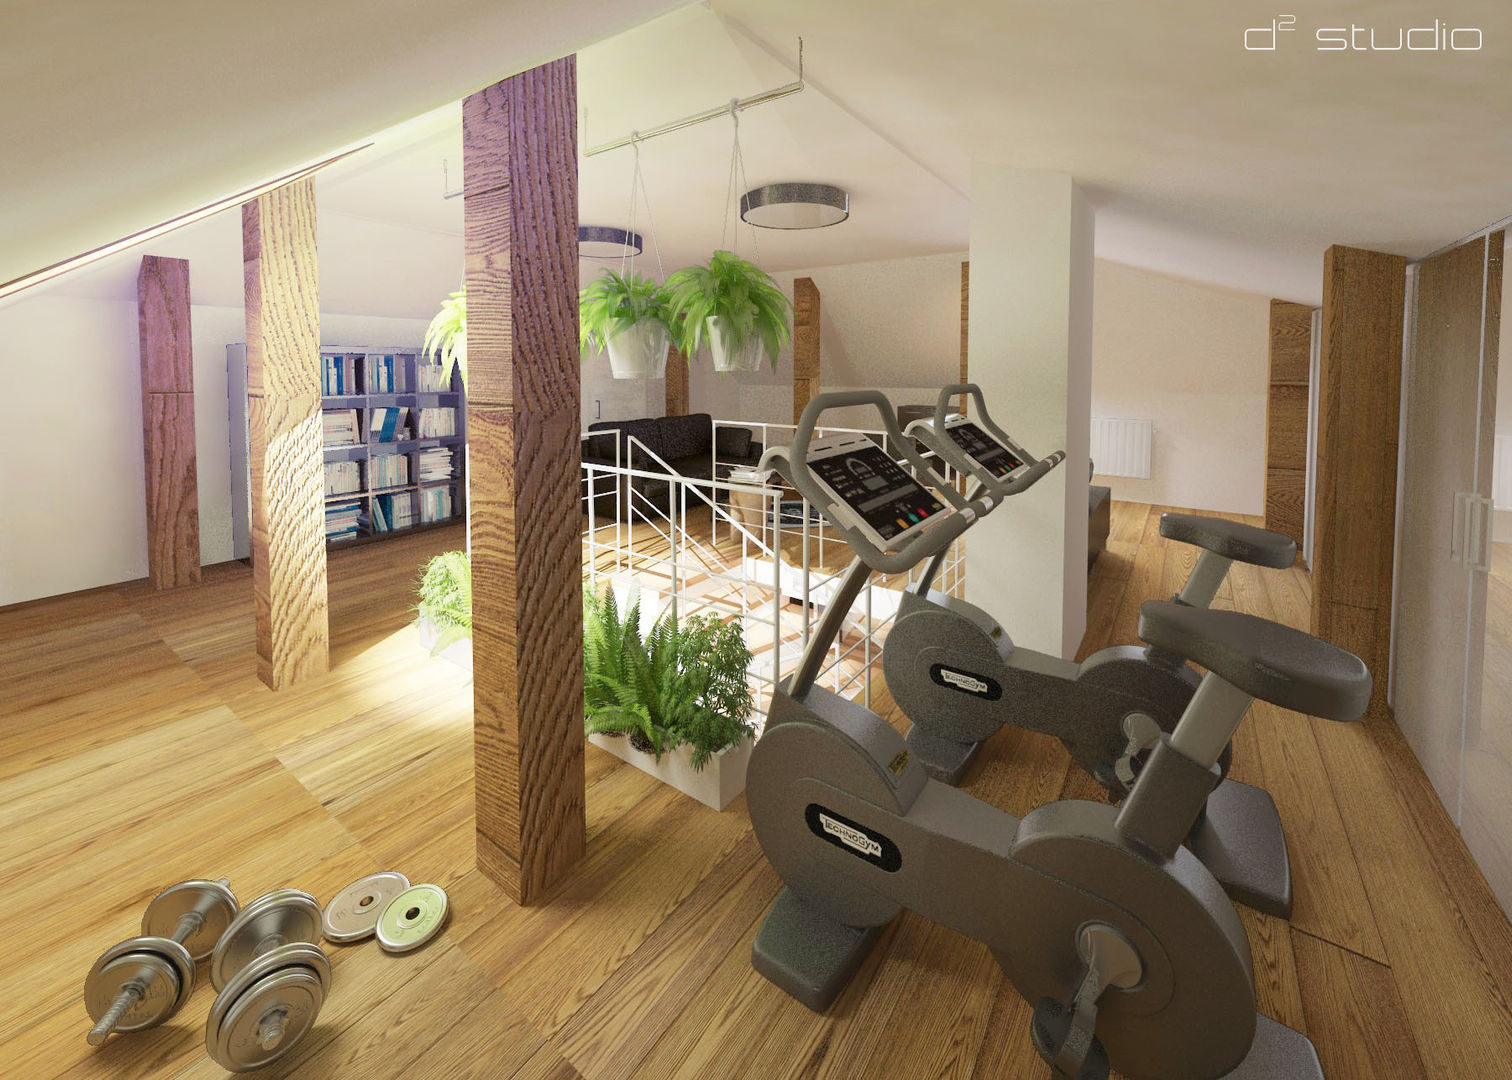 Attic with personal gym D2 Studio